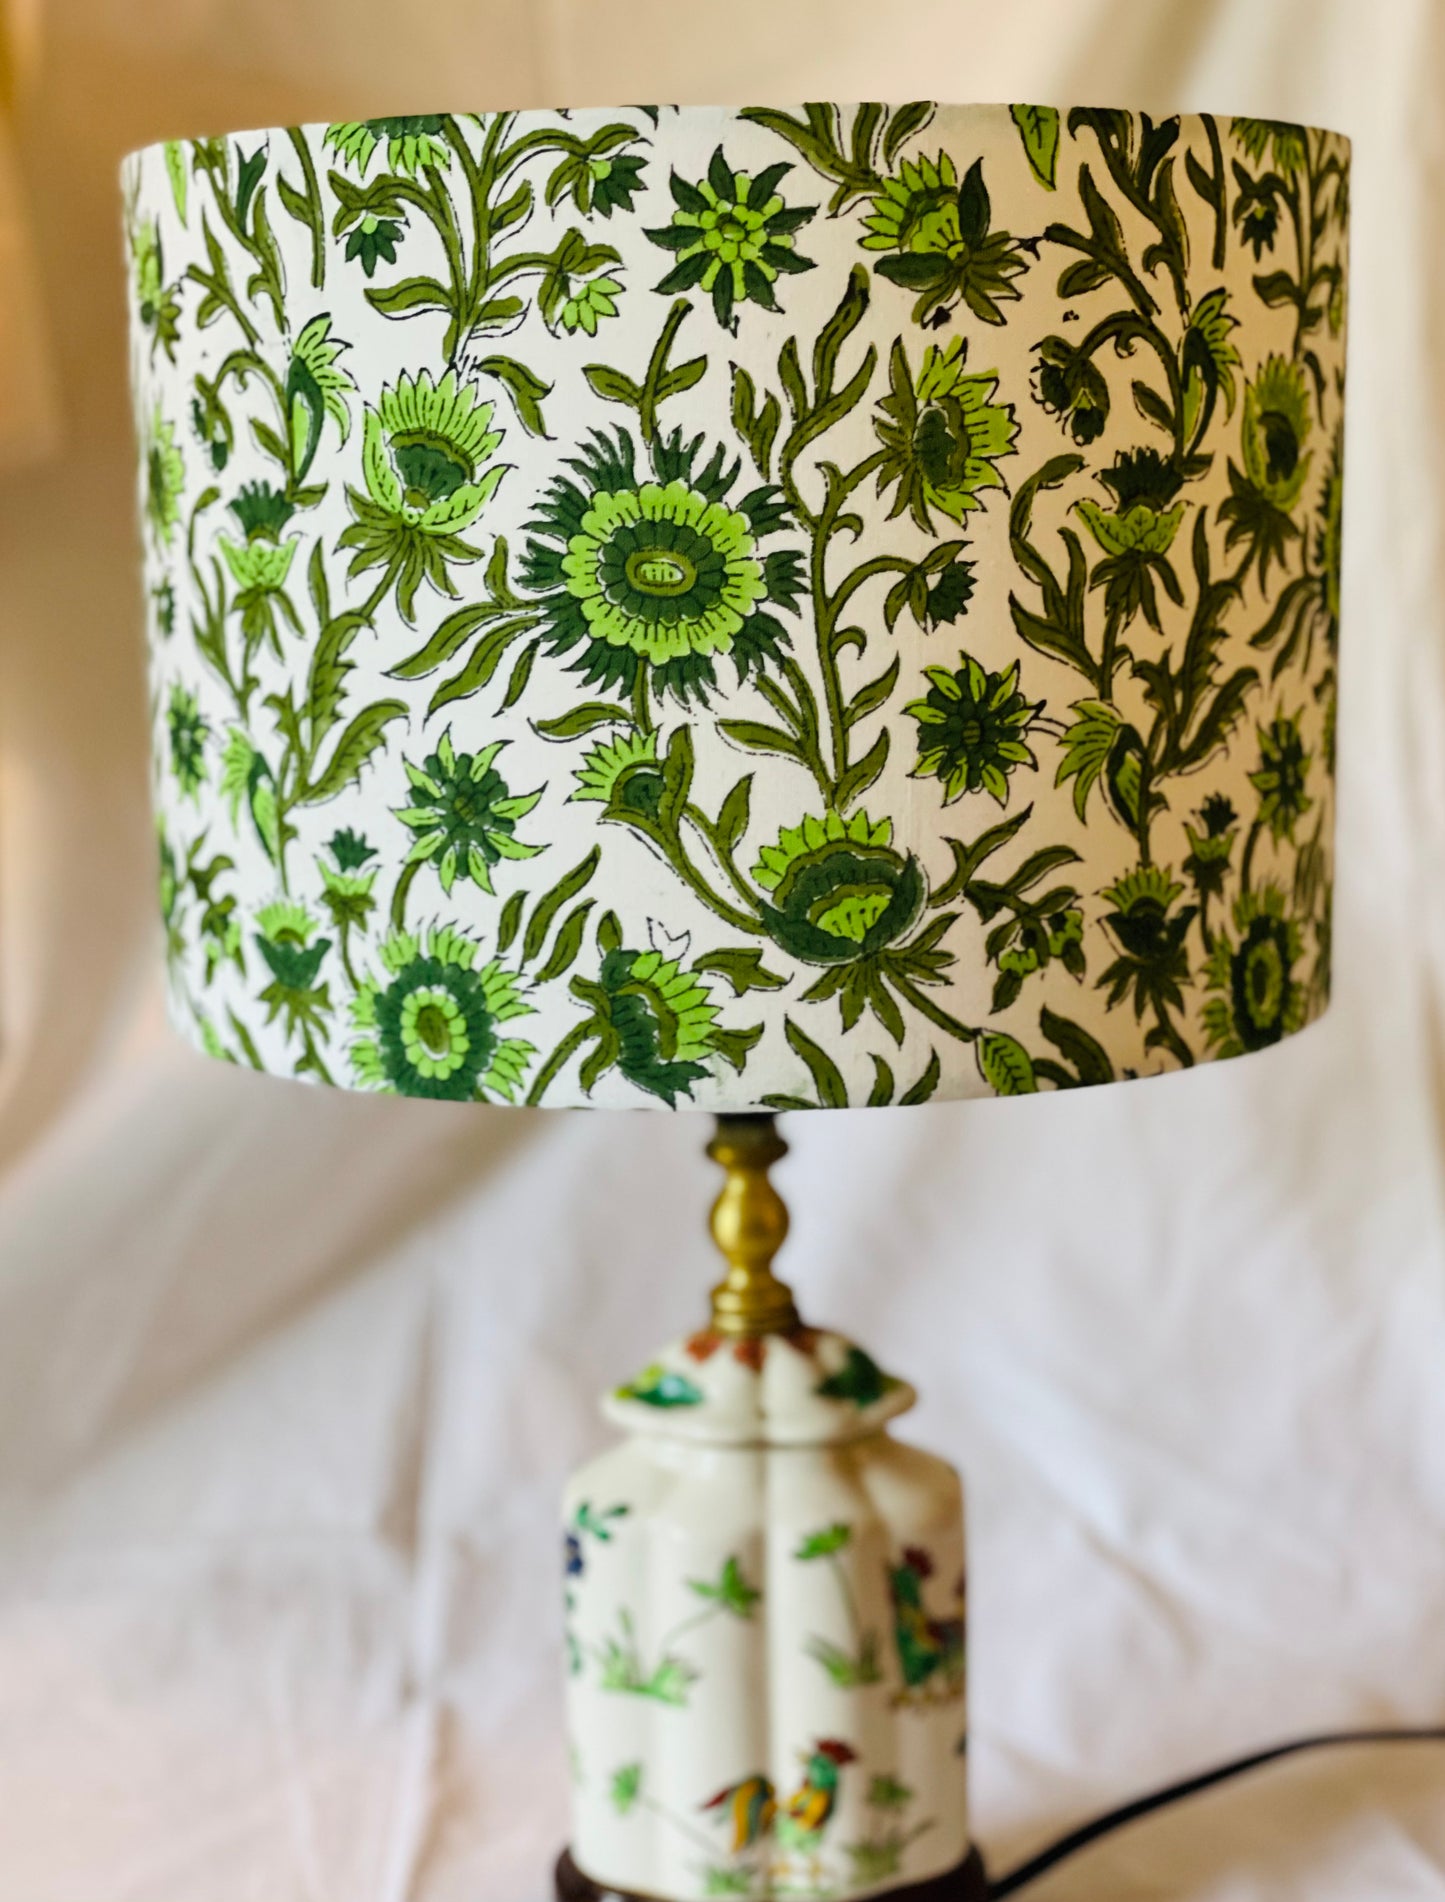 10 inch Drum Lampshade. Indian Block print from Jaipur. Pistachio, Olive Green, and Avocado Floral Motif.